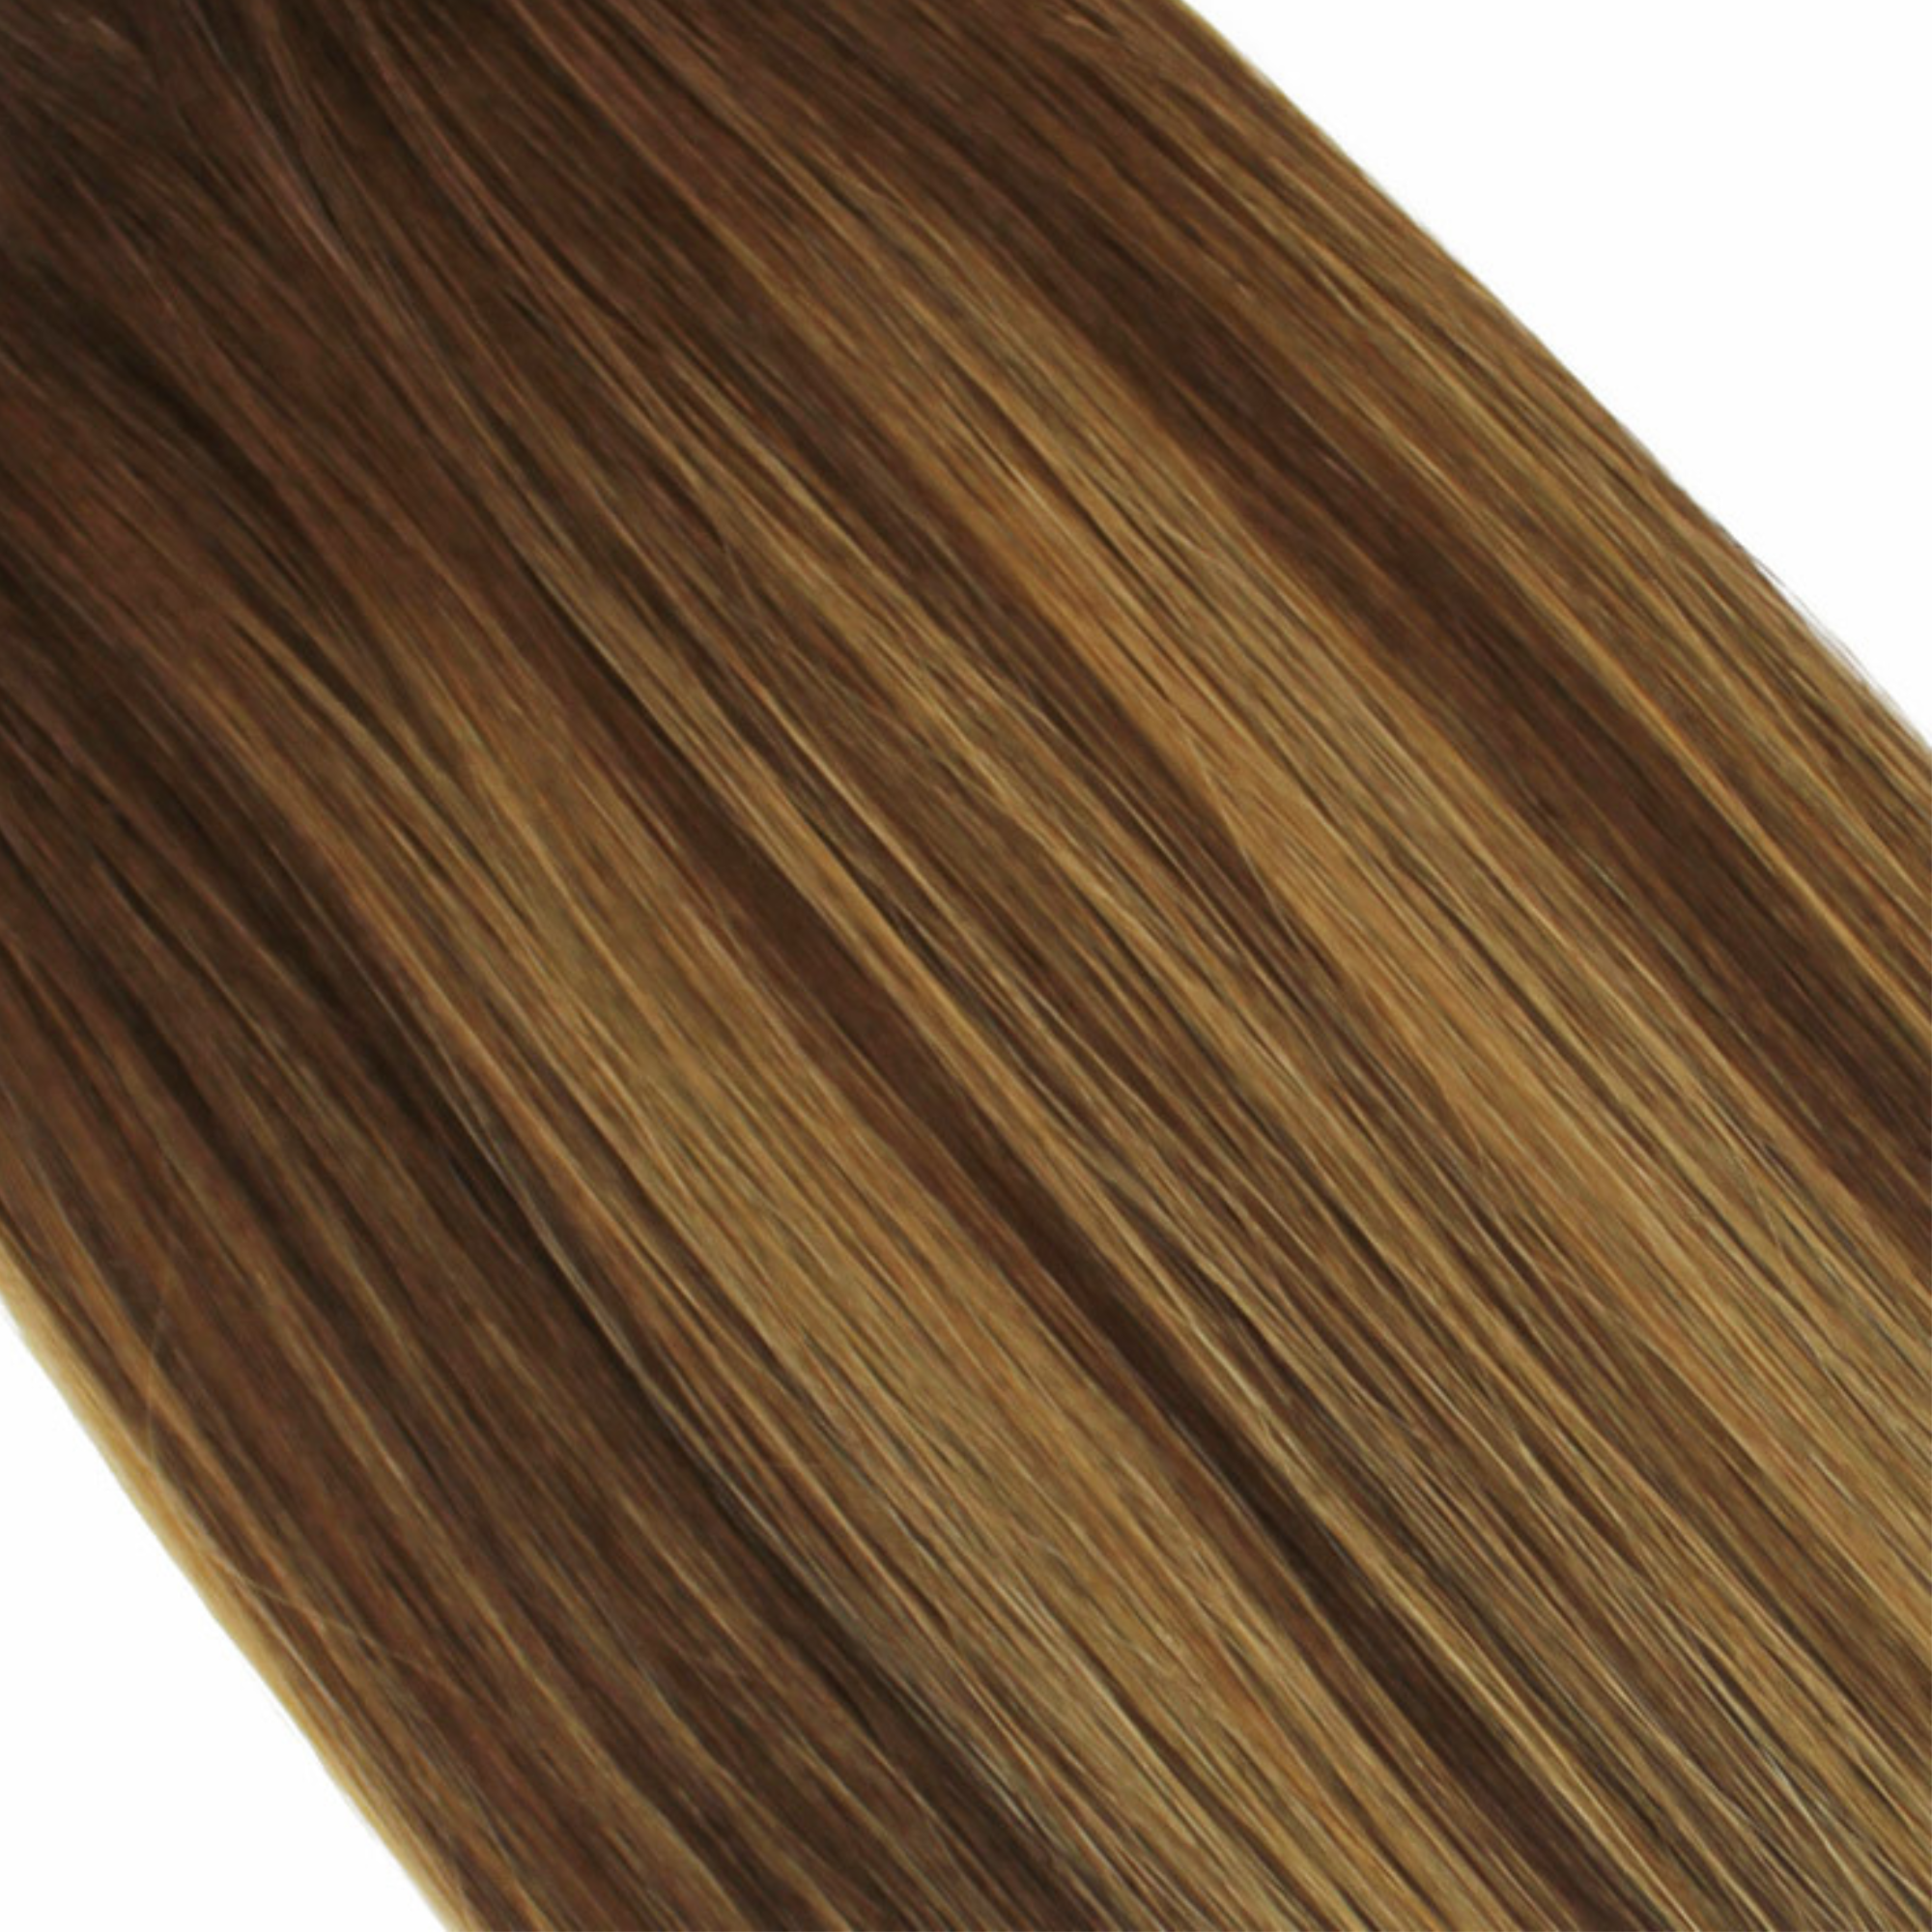 "hair rehab london 14" weft hair extensions shade swatch titled rooted bronze"